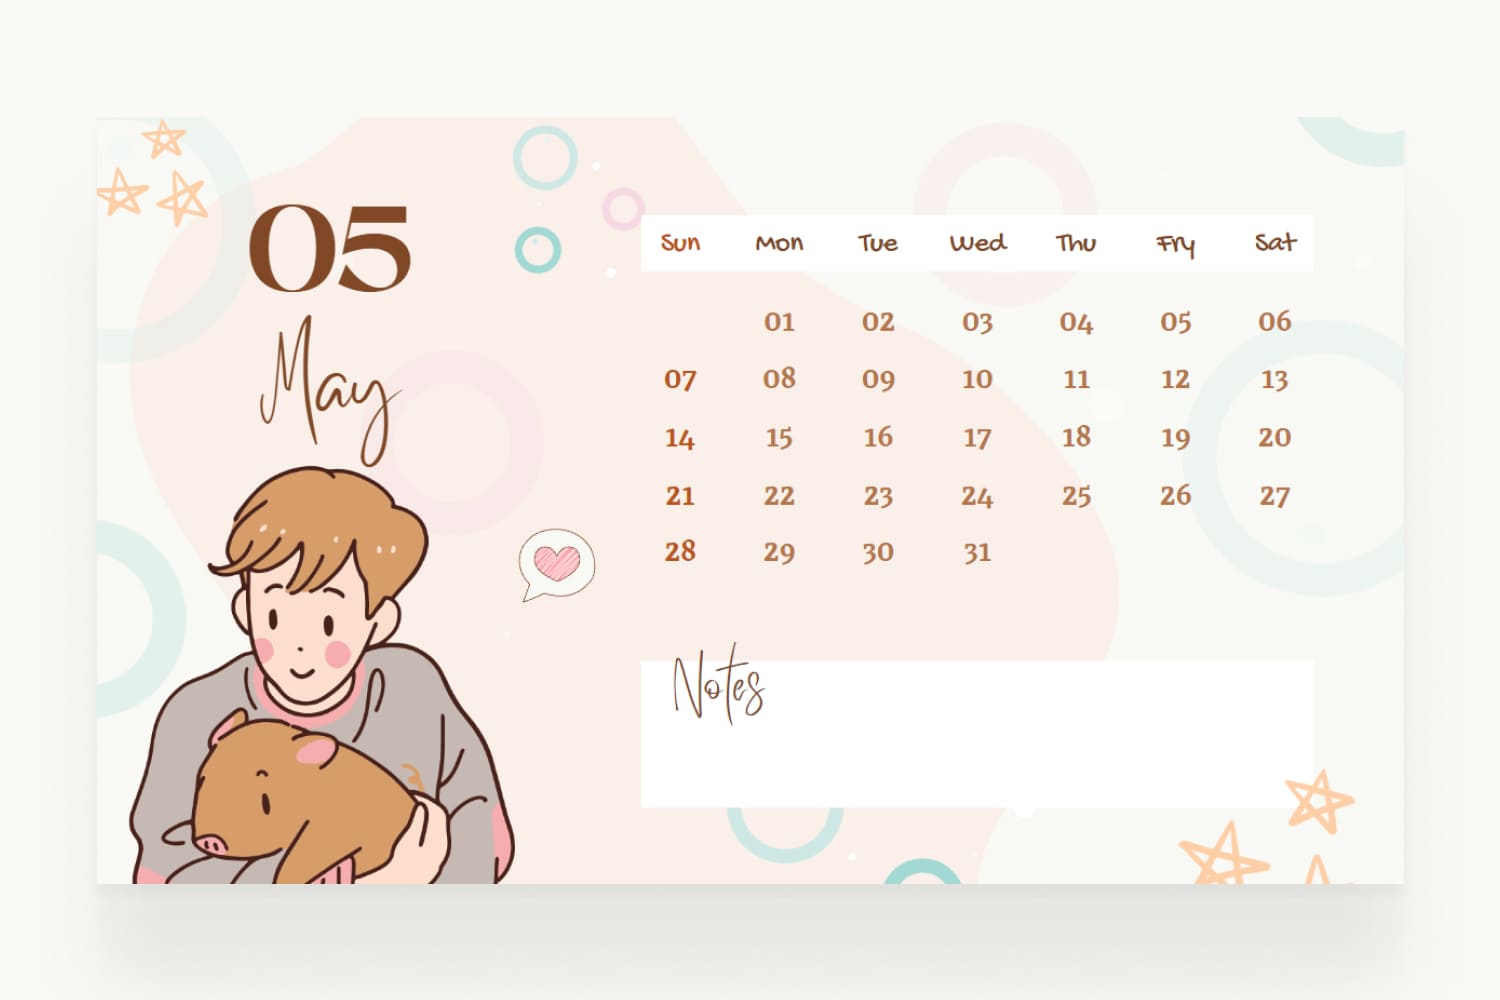 Calendar with a creamy yellow colors with cute childlike illustrations and space for notes.